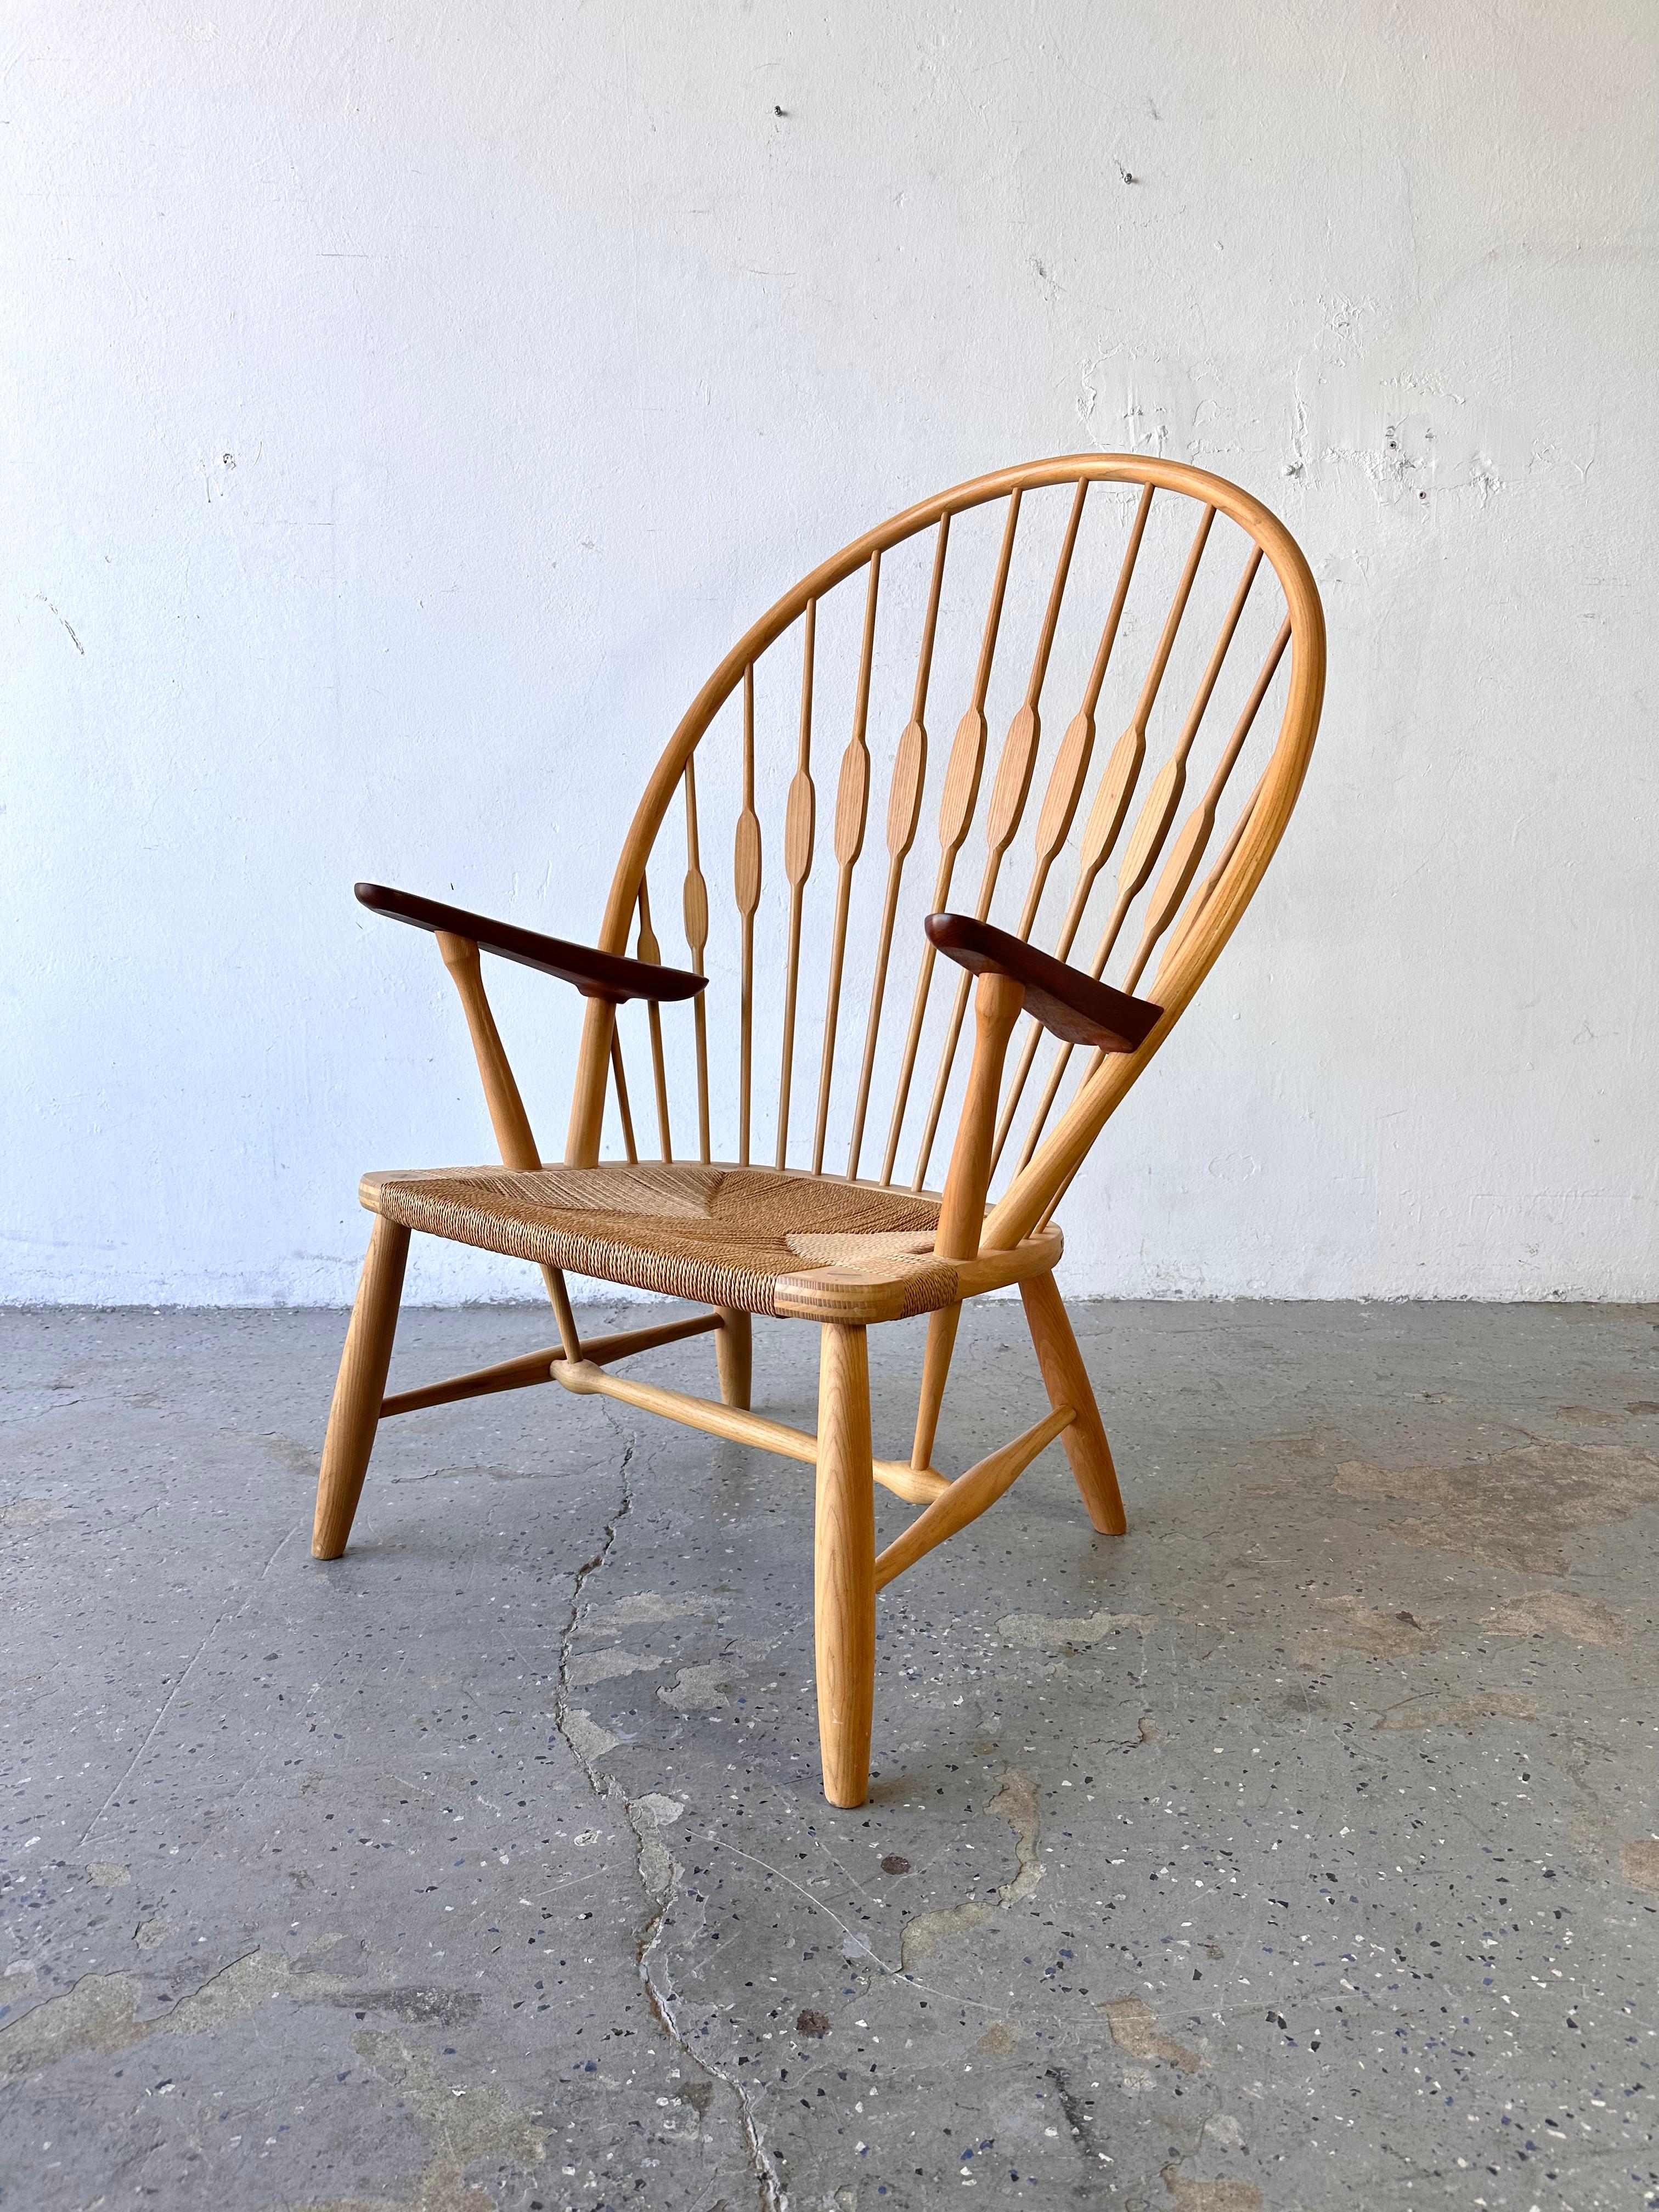 A Mid-Century Modern PP550 ‘Peacock’ chair designed by Hans Wegner in 1947 for Johannes Hansen.

Modeled after a traditional American Windsor chair, Hans Wegner’s Peacock chair strips the form to reveal its construction while retaining aesthetic,